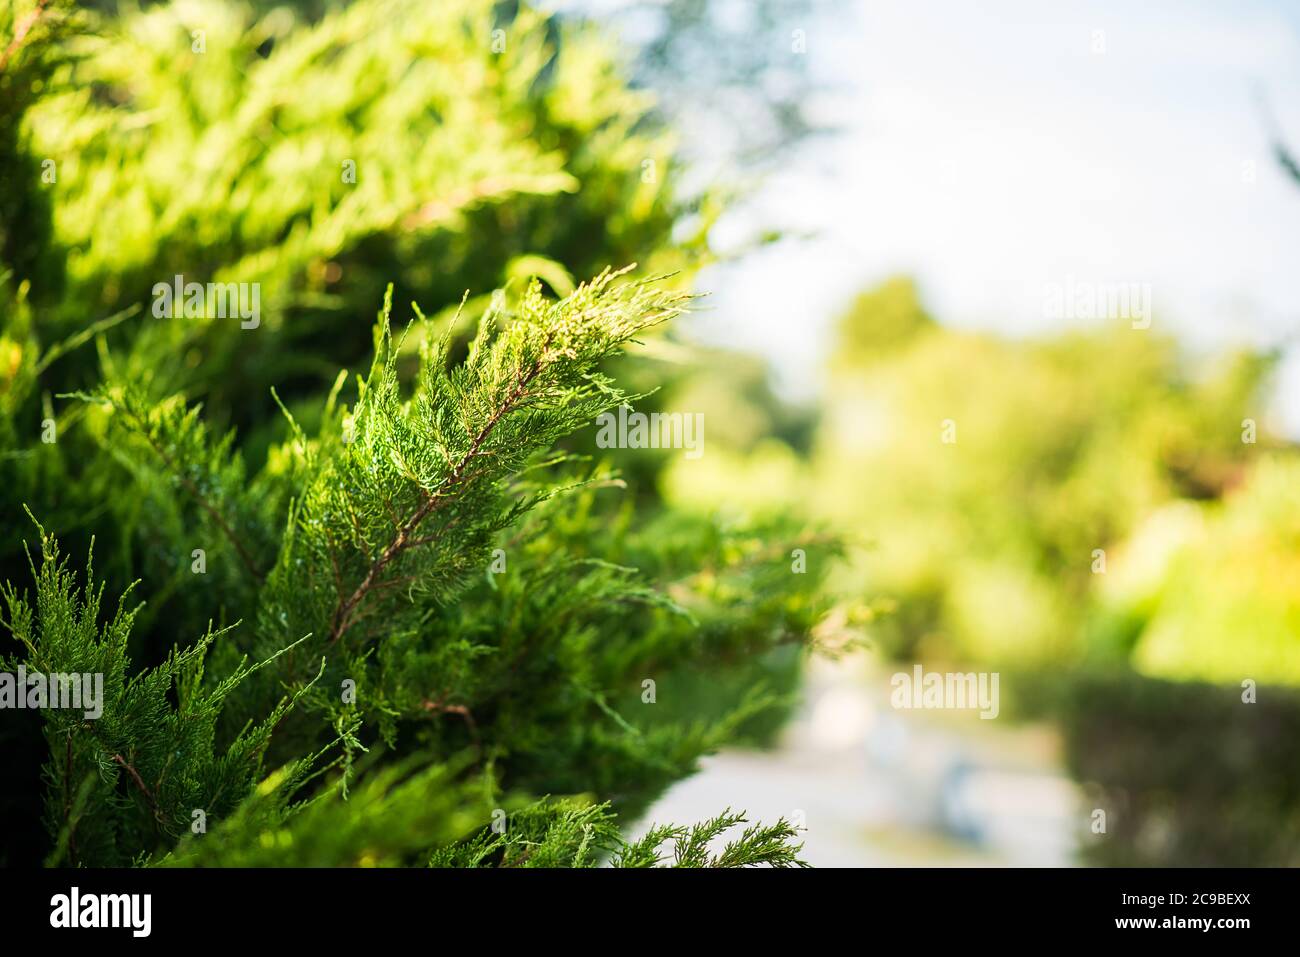 Juniper Branch. Close up View with Blurred Background. Juniper Tree Texture Background. Evergreen Coniferous Juniper Bright Green Color Surface. Stock Photo